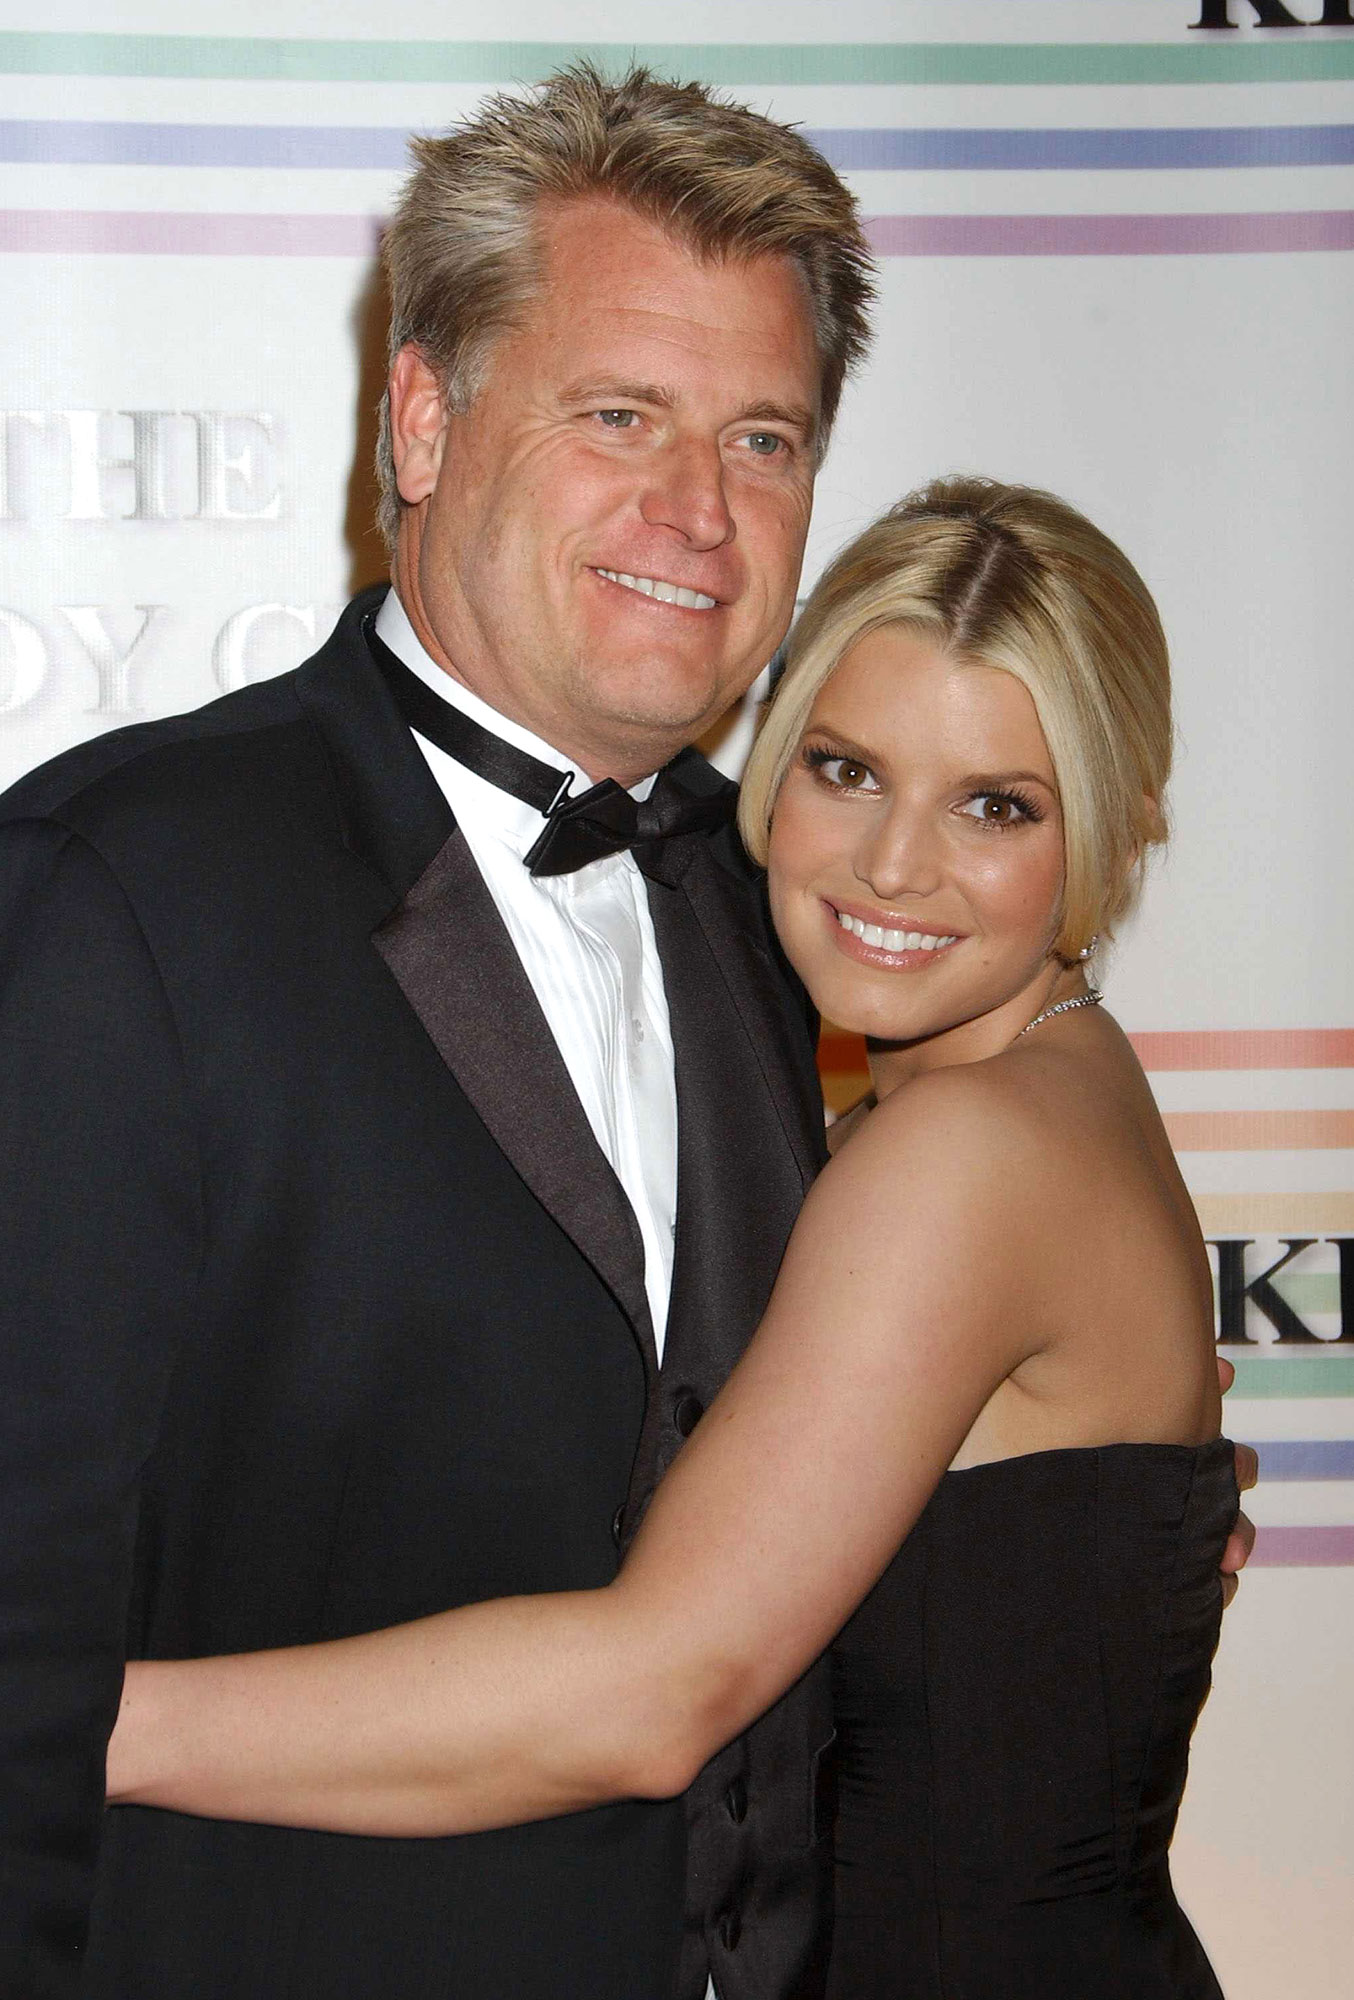 Jessica Simpson and Father Joe Simpson Stars Embarrassing Their Parents